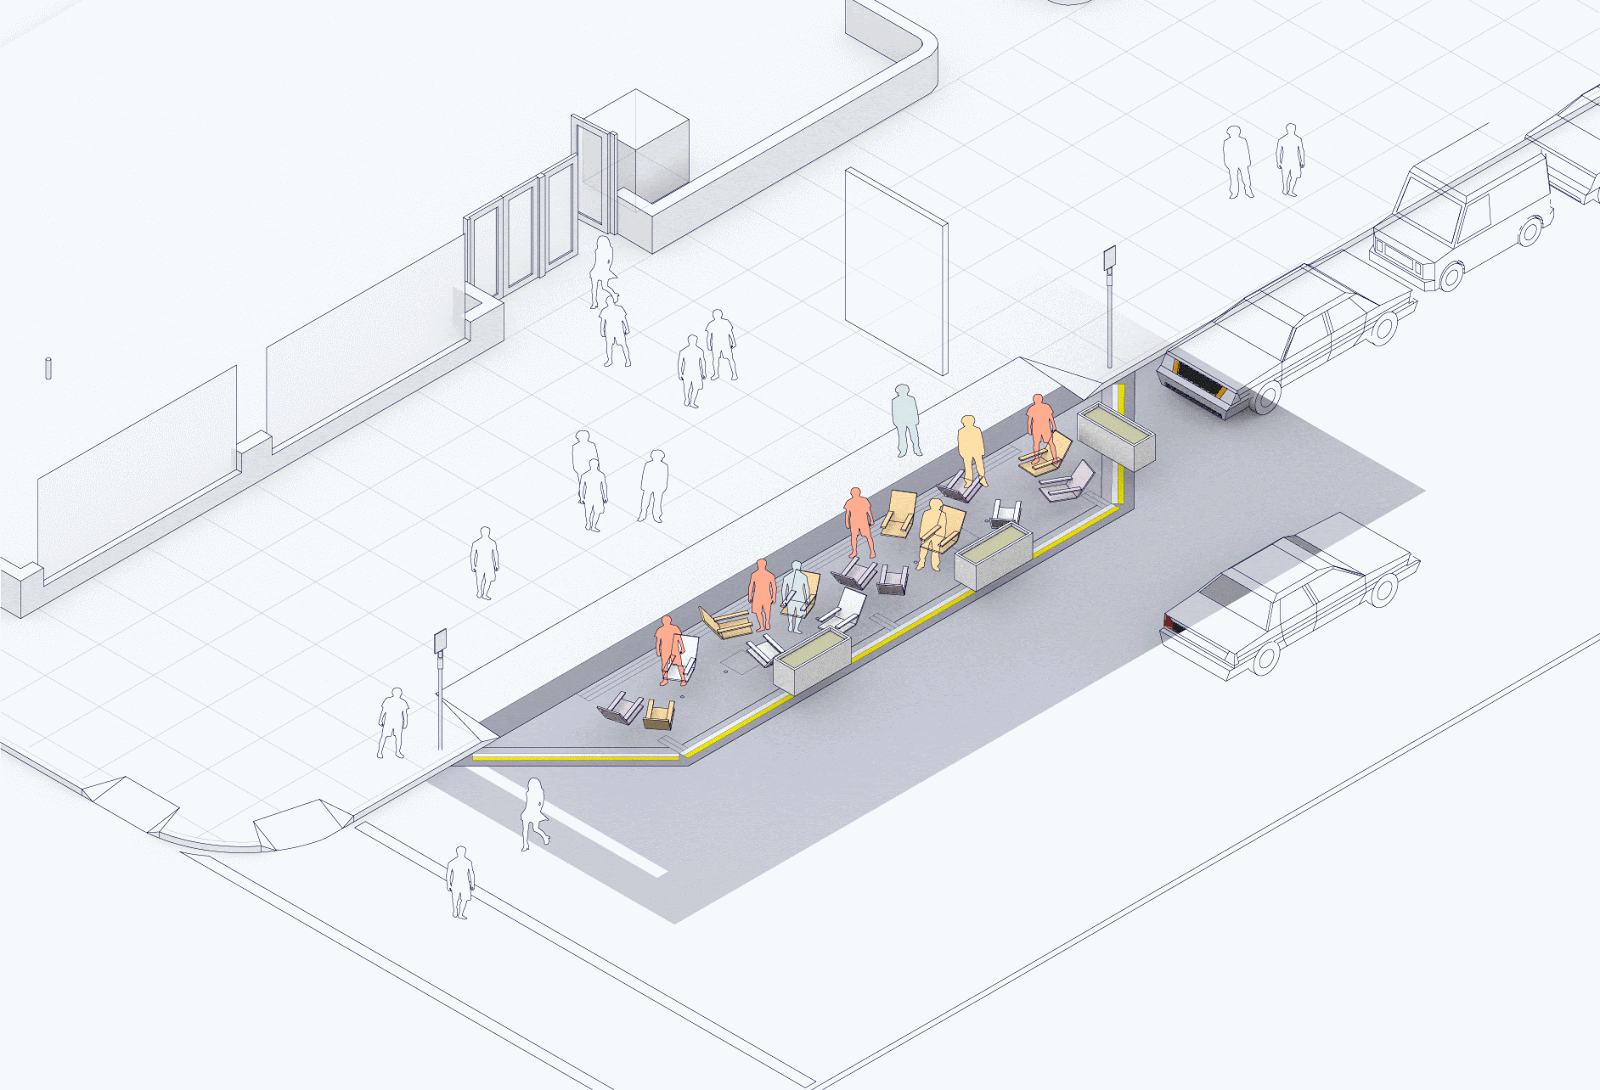 Gif of a curb space being used for different uses, like car parking, truck loading, curbside dining.